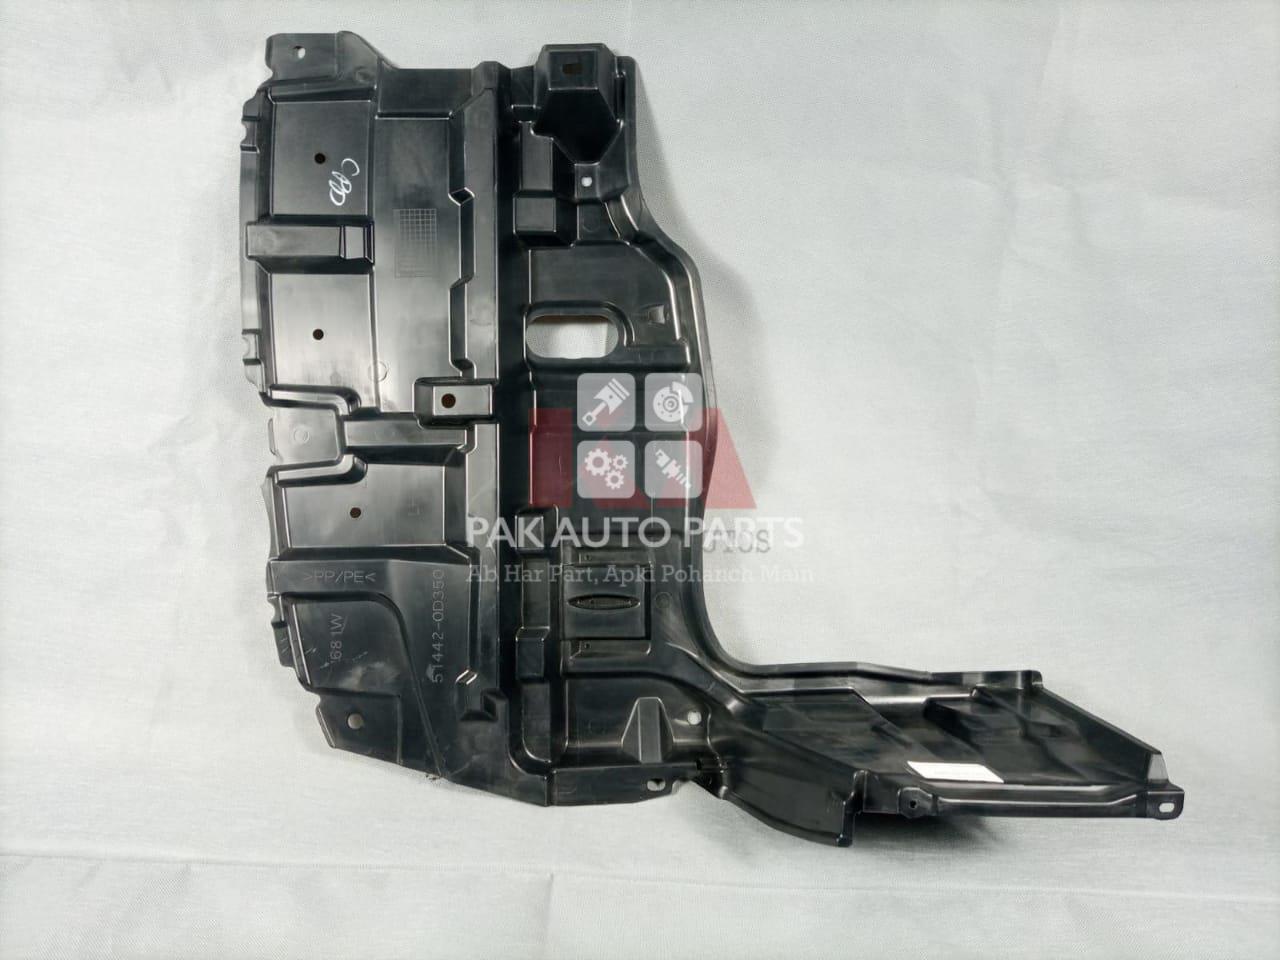 Picture of Toyota Yaris 2019-22 Left Side Engine Shield